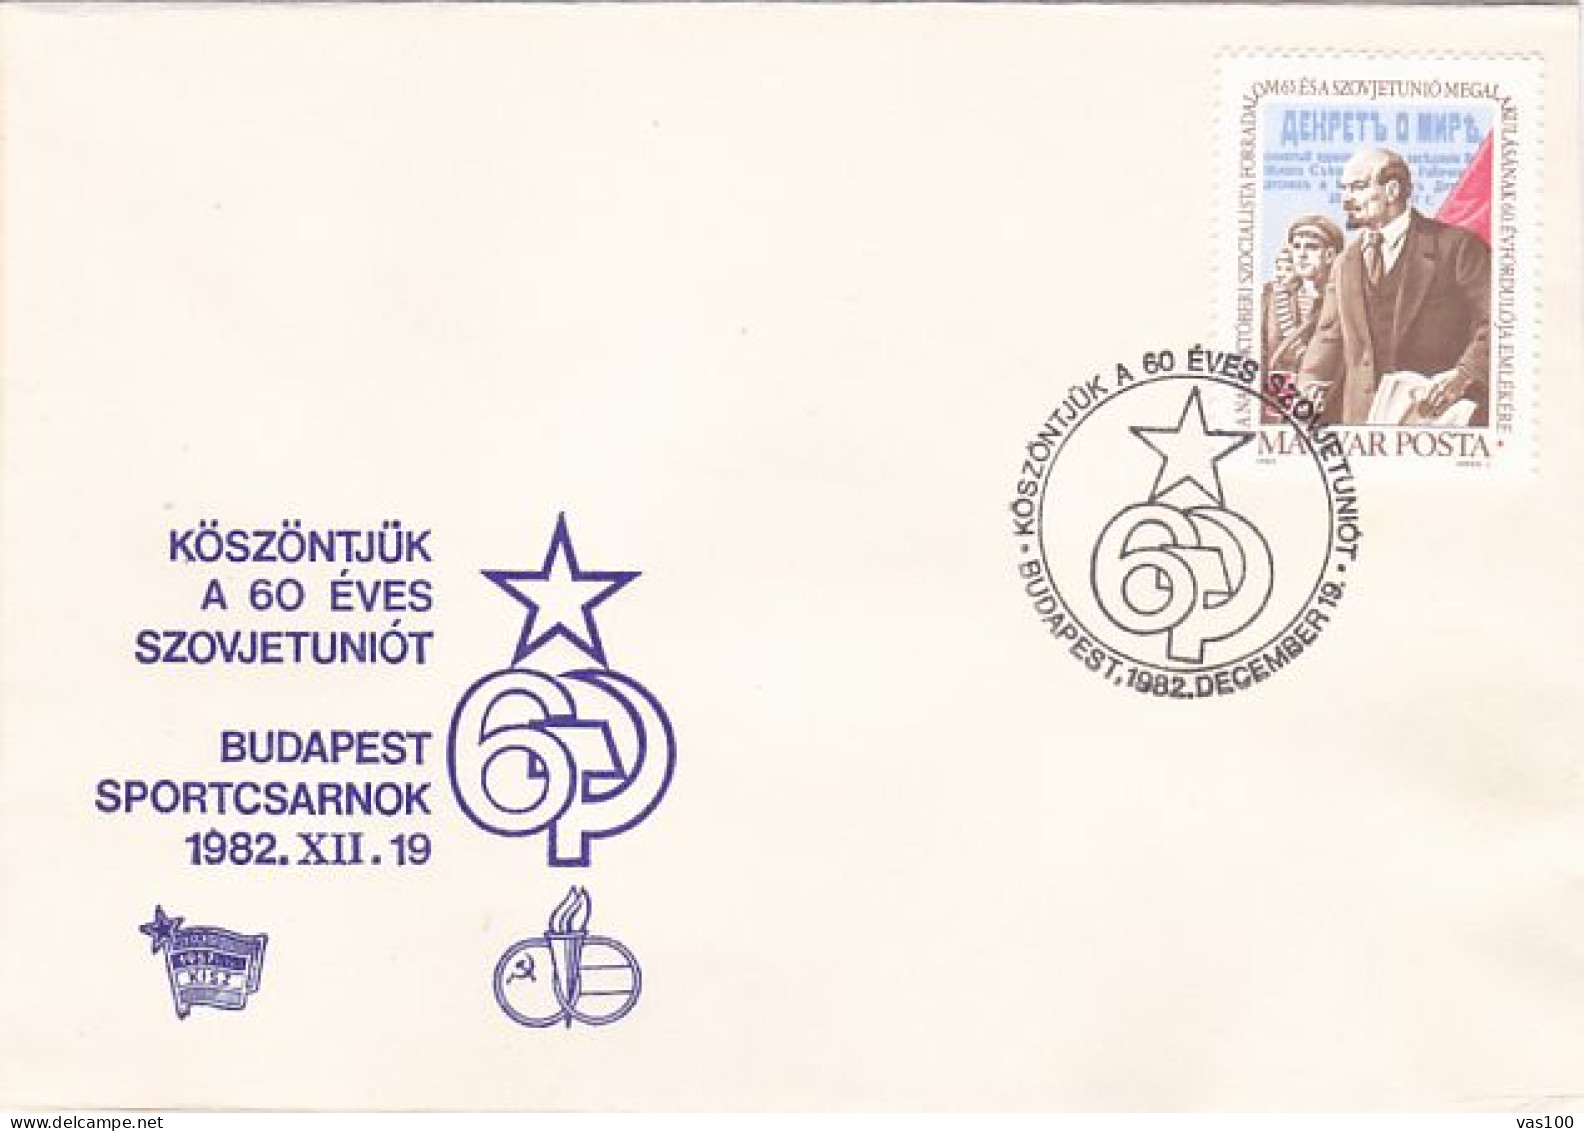 SOVIET UNION ANNIVERSARY, BUDAPEST PHILATELIC EXHIBITION, SPECIAL COVER, 1982, HUNGARY - Covers & Documents